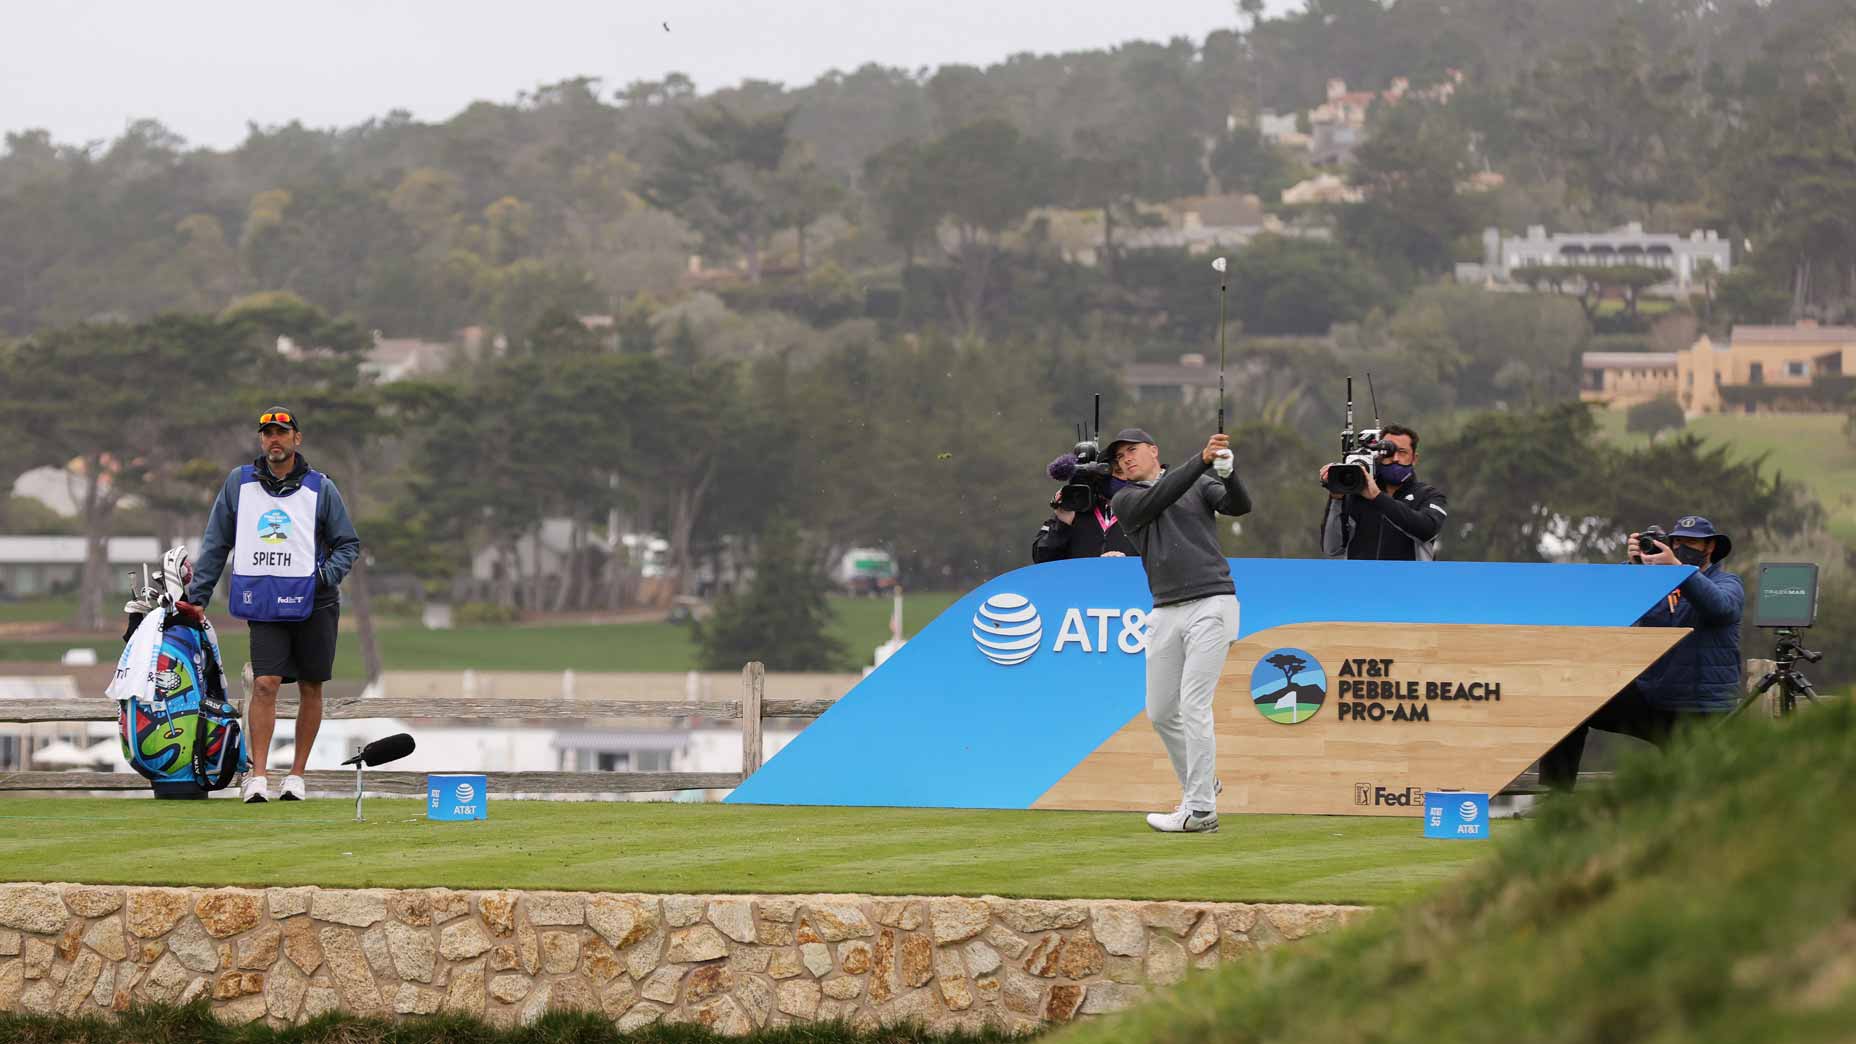 2022 AT&T Pebble Beach Pro-Am: How to watch, TV schedule, streaming